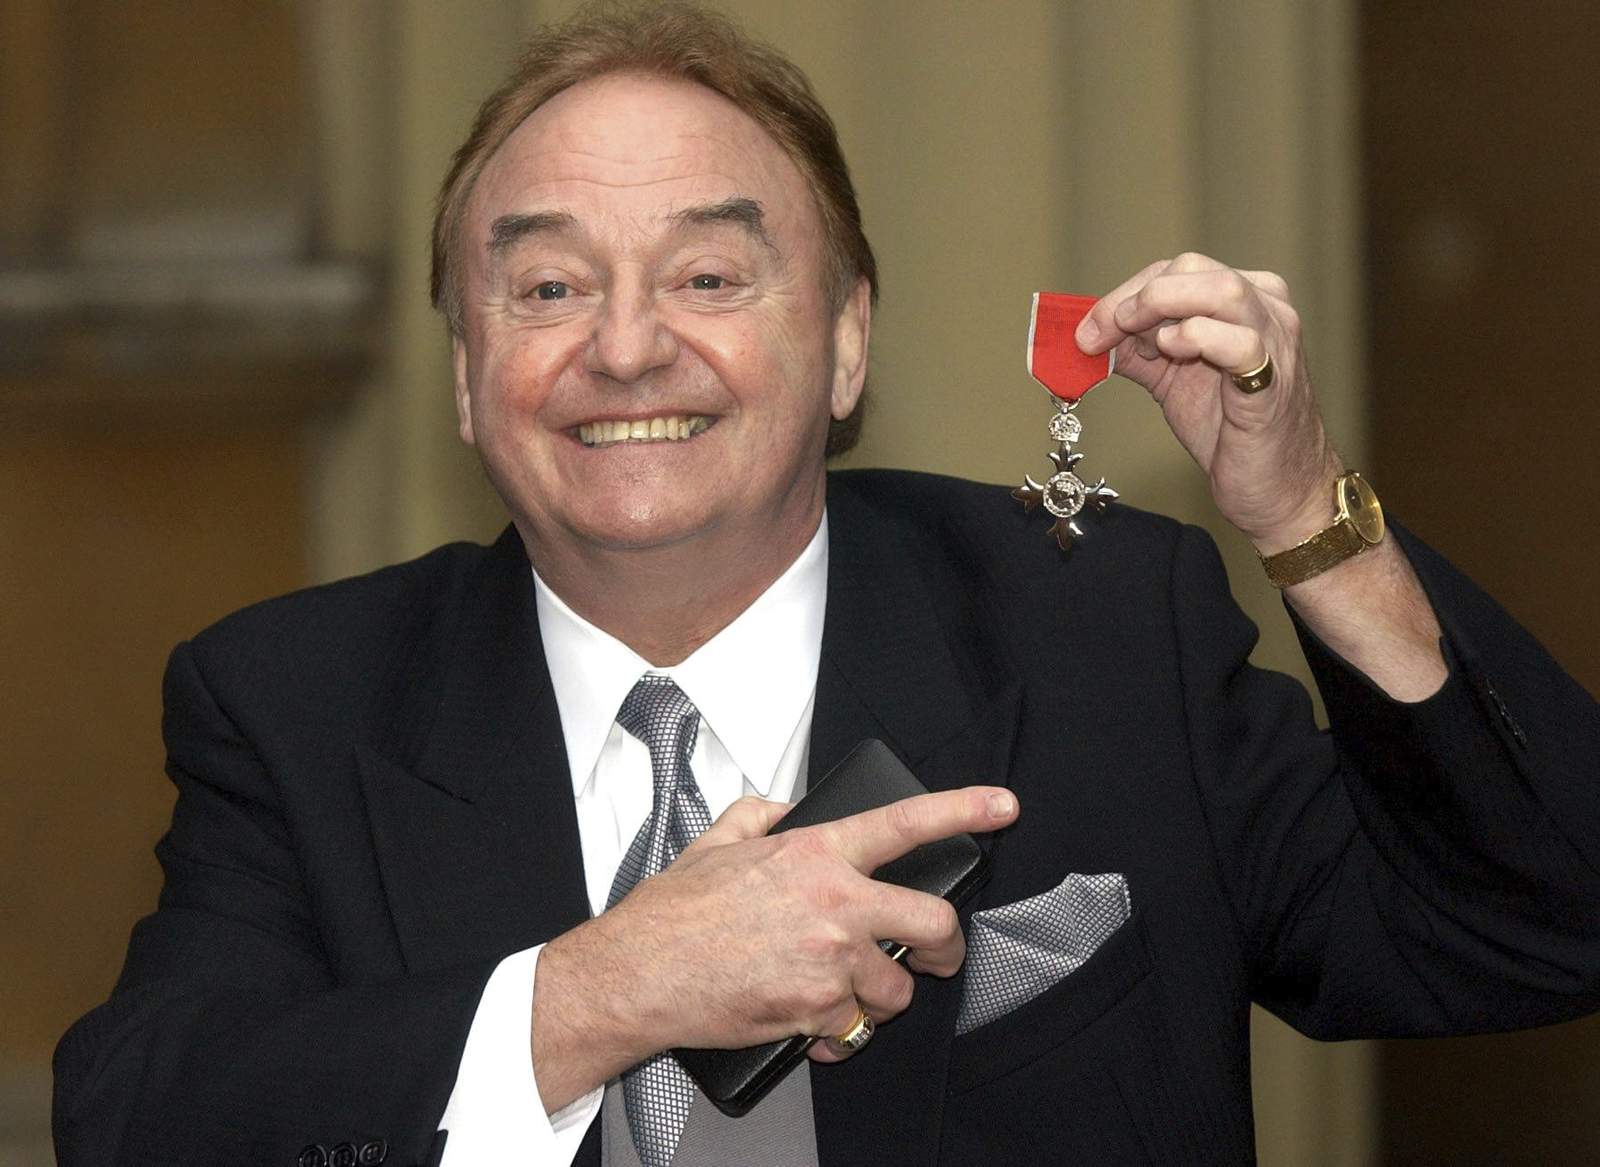 'You'll Never Walk Alone:' Singer Gerry Marsden dies at 78